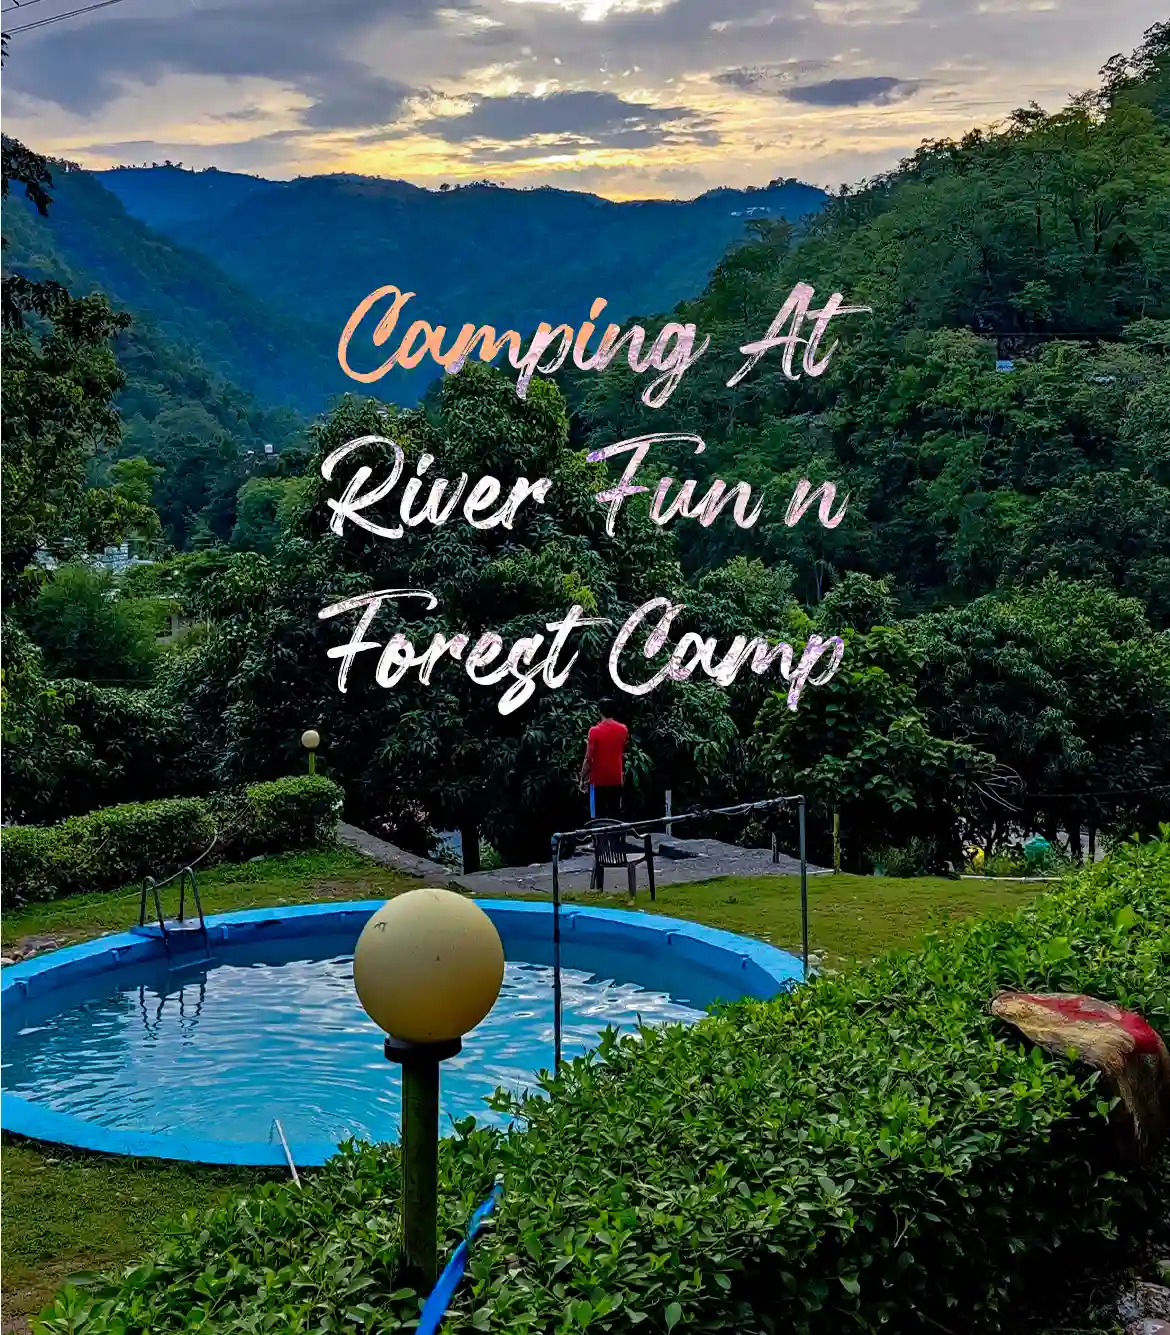 River Fun and Forest Camp